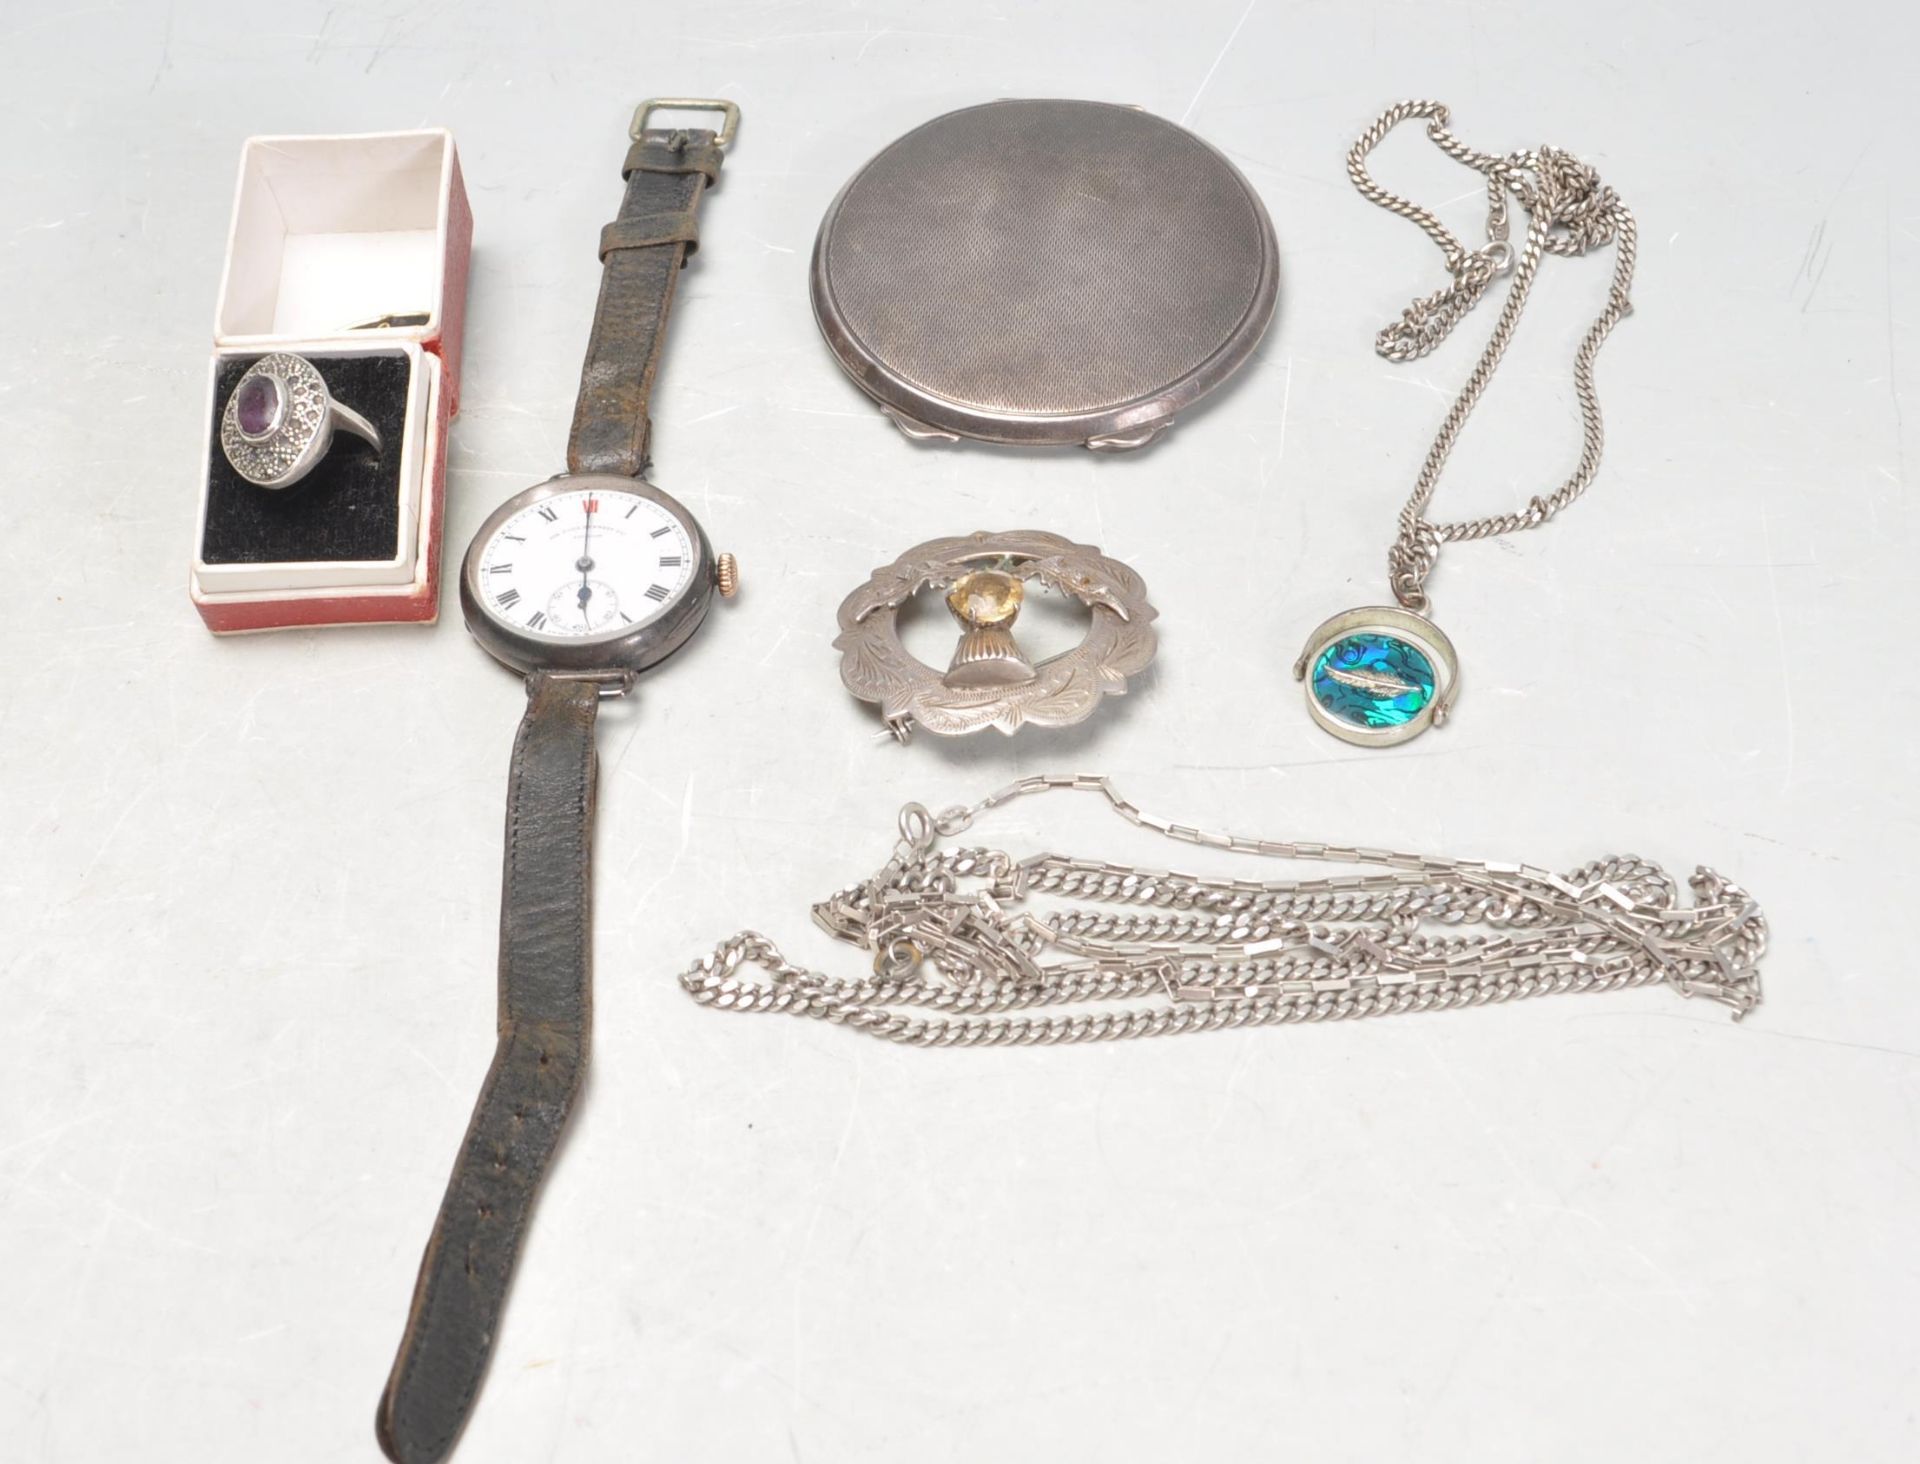 GROUP OF VINTAGE SILVER JEWELLERY AND ACCESSORIES